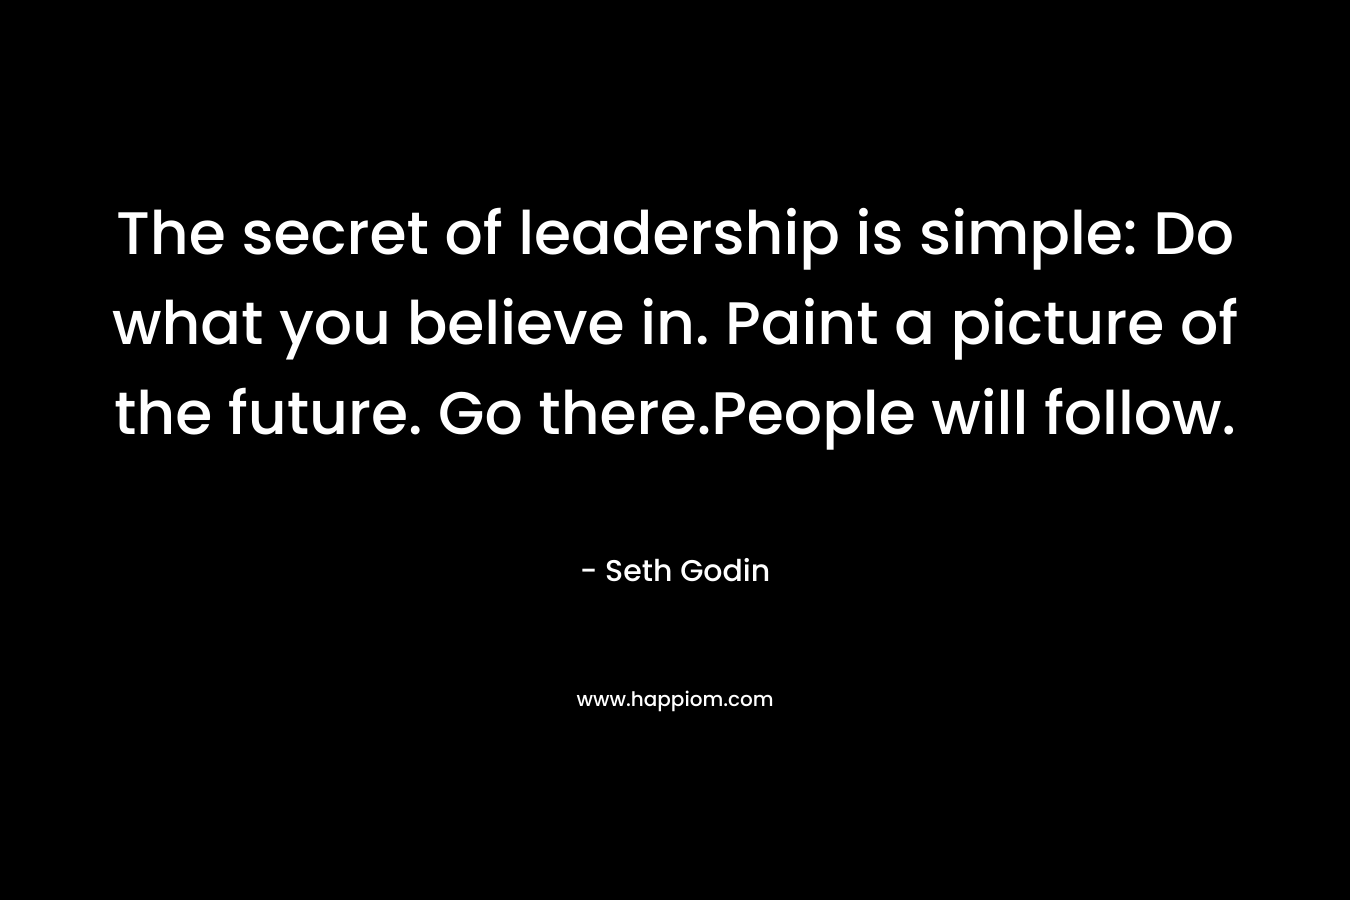 The secret of leadership is simple: Do what you believe in. Paint a picture of the future. Go there.People will follow.